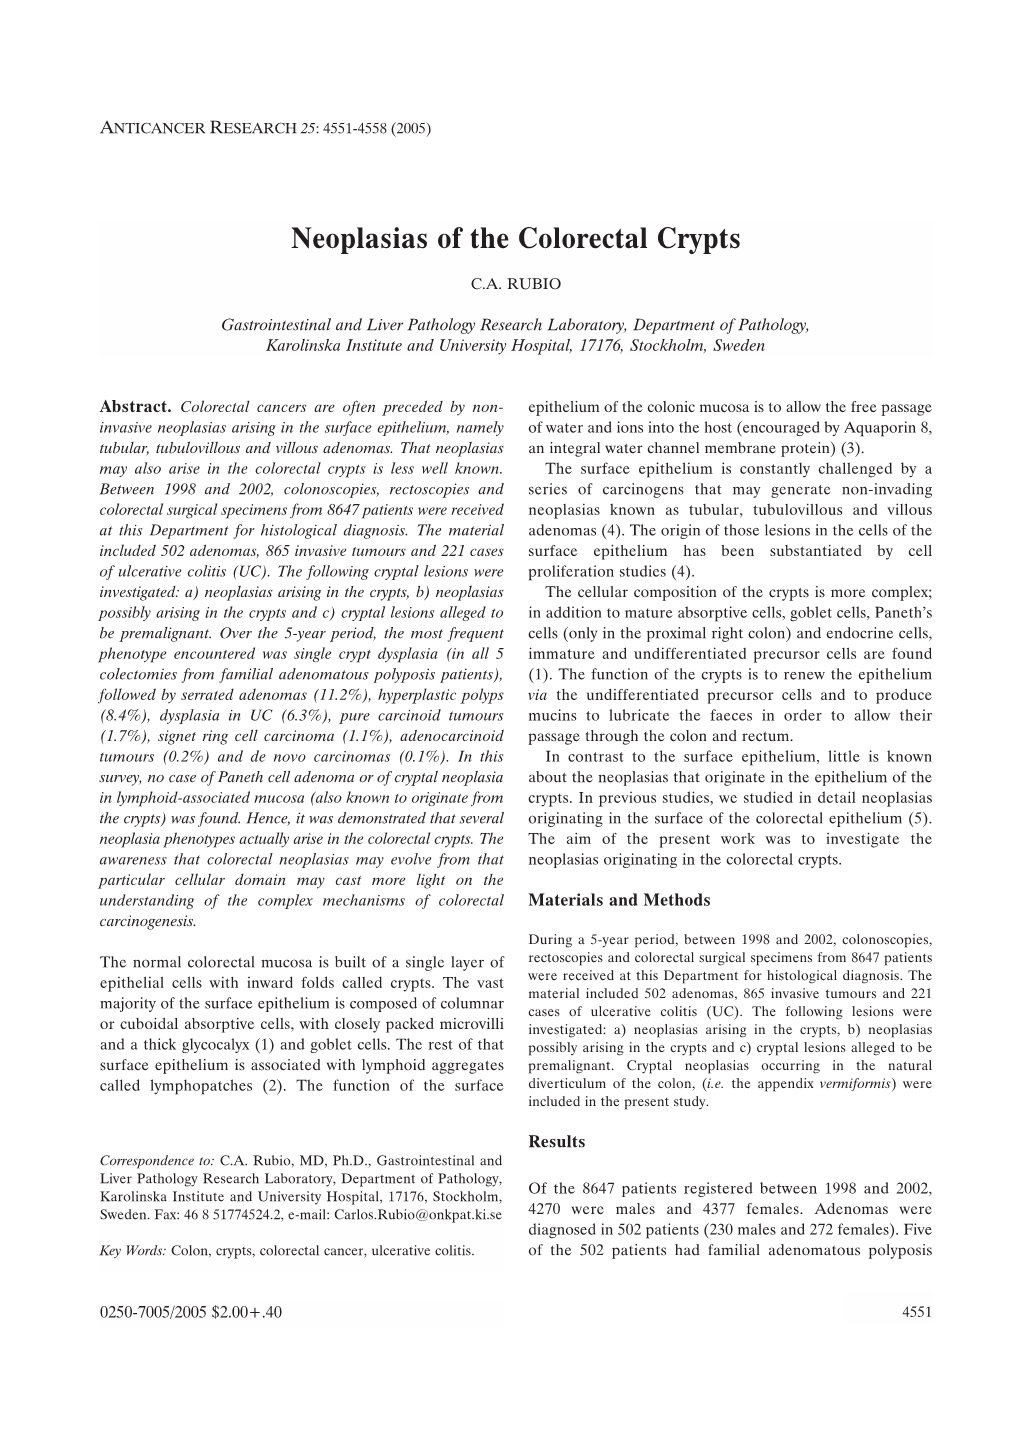 Neoplasias of the Colorectal Crypts